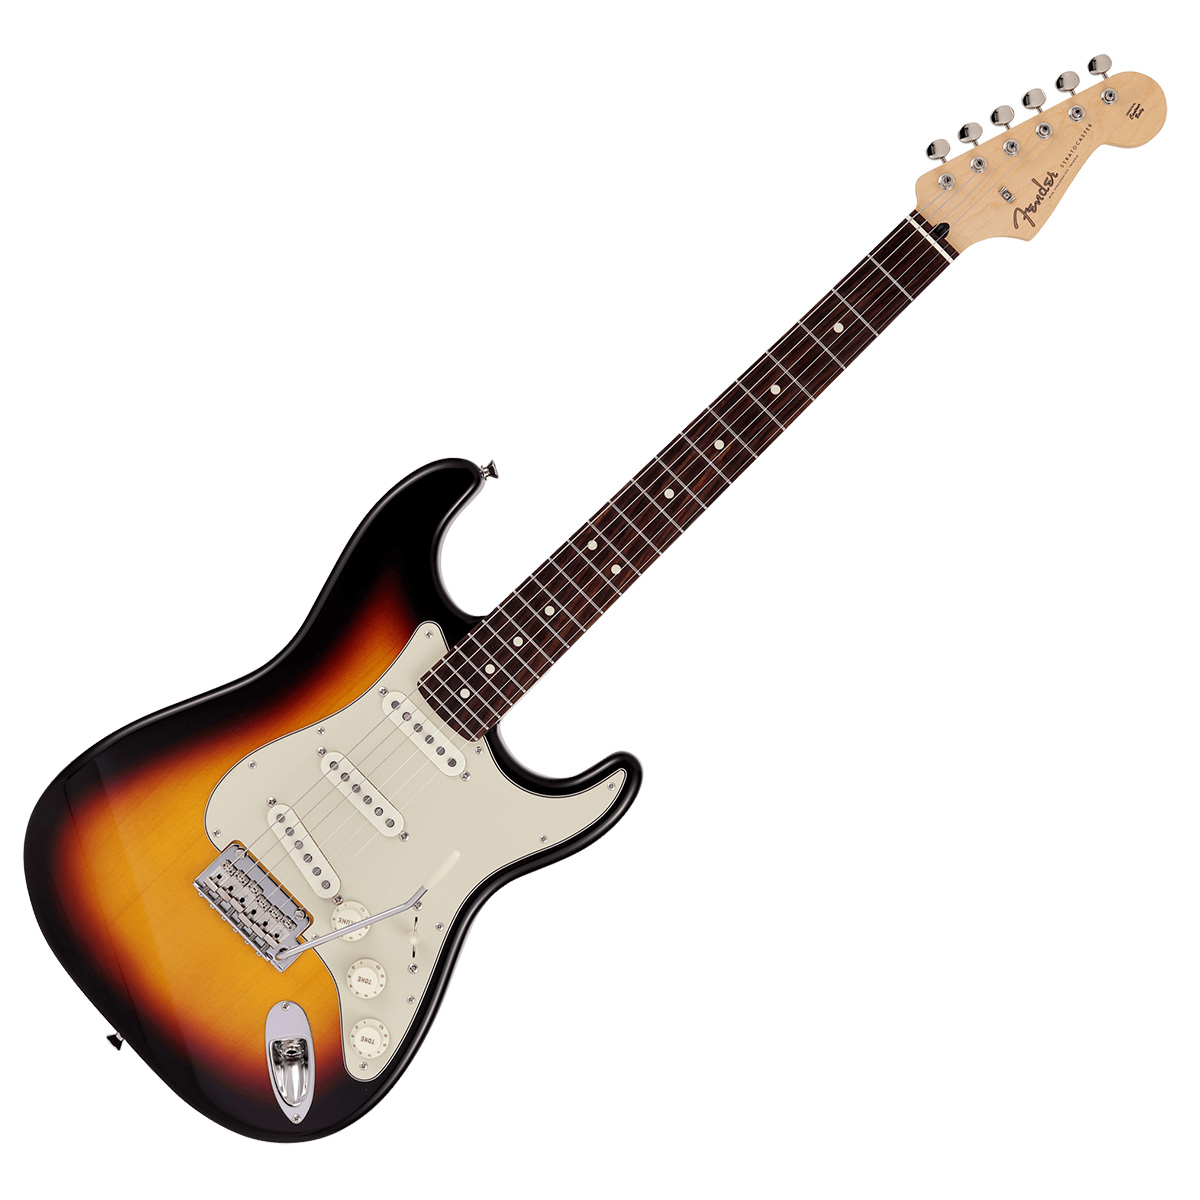 Fender Made in Japan Junior Collection Stratocaster エレキギター ストラトキャスター  ショートスケール フェンダー 【 Ｃｏａｓｋａ　Ｂａｙｓｉｄｅ　Ｓｔｏｒｅｓ　横須賀店 】